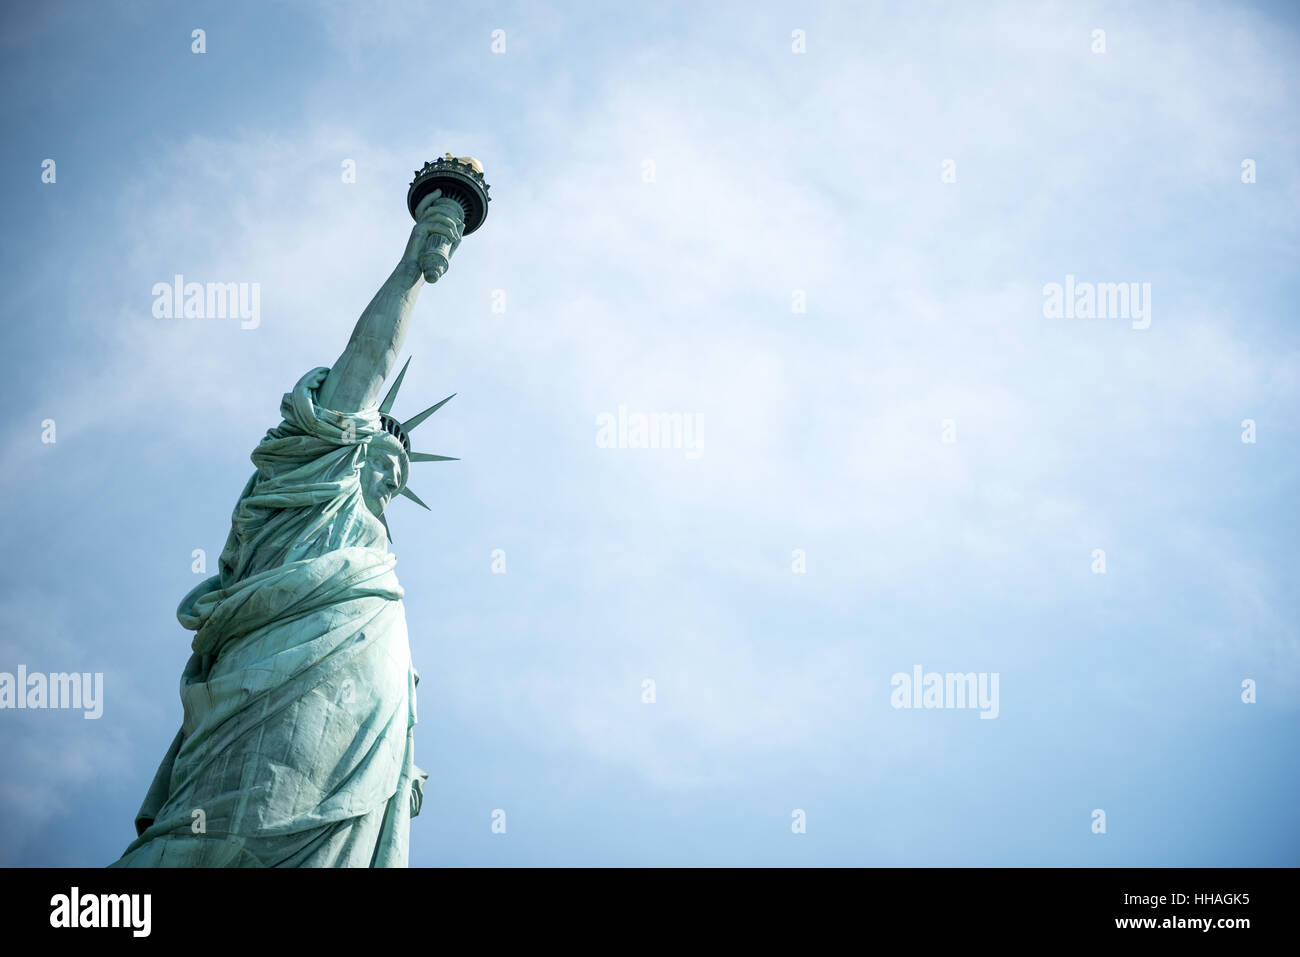 A view of the Statue of Liberty, New York City Stock Photo